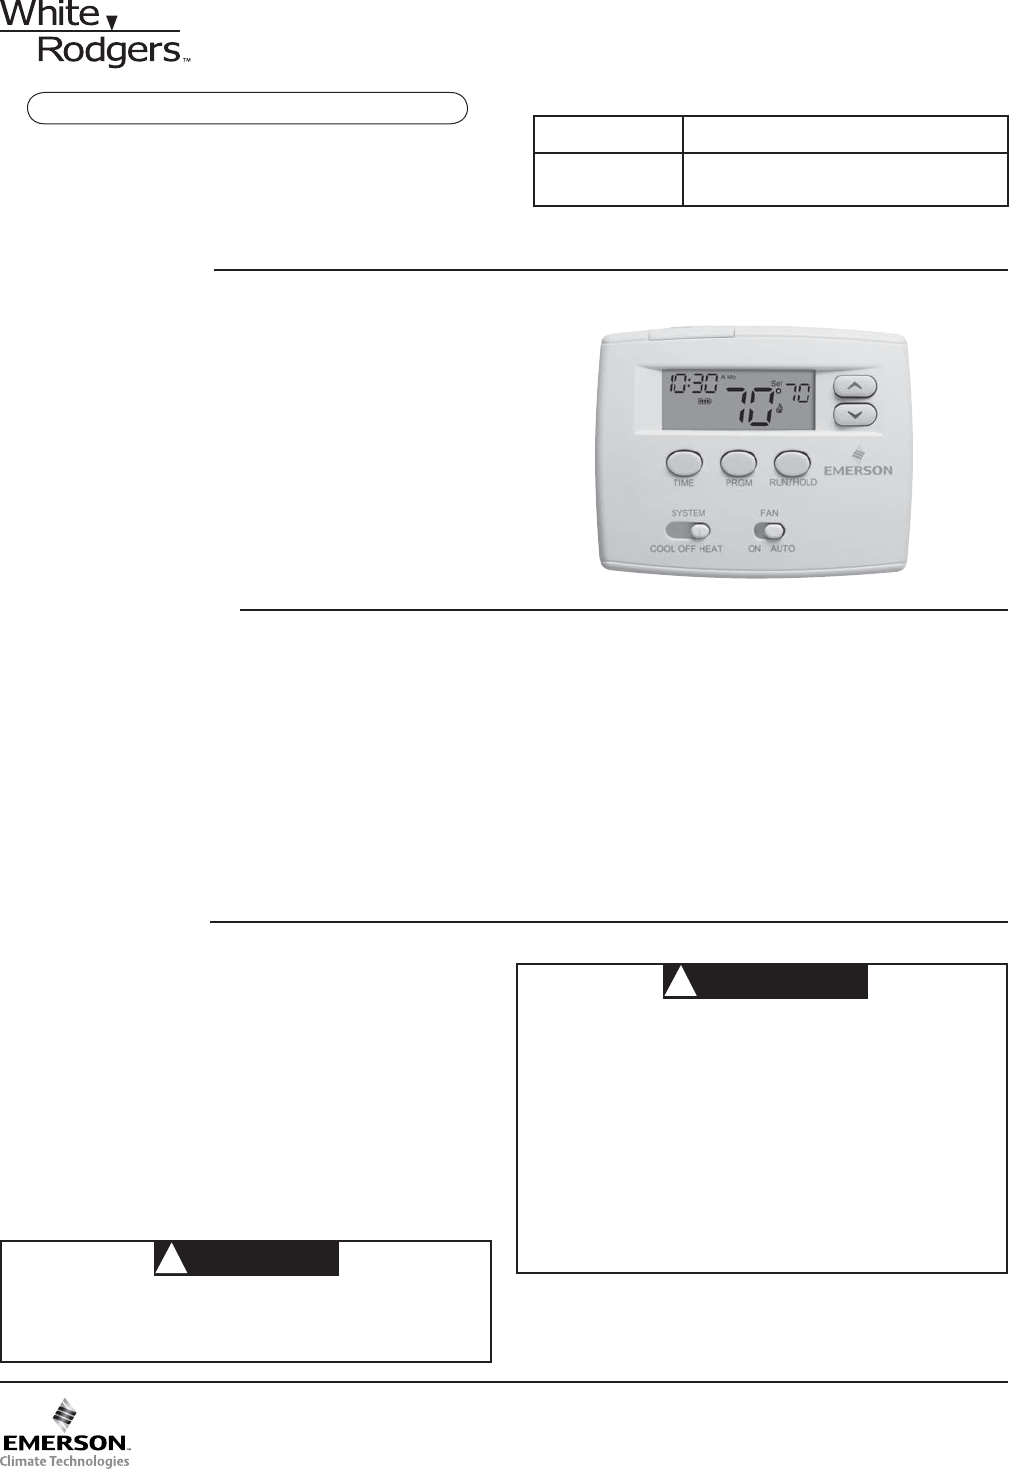 White Rodgers Thermostat 1F80-0261 User Guide | ManualsOnline.com